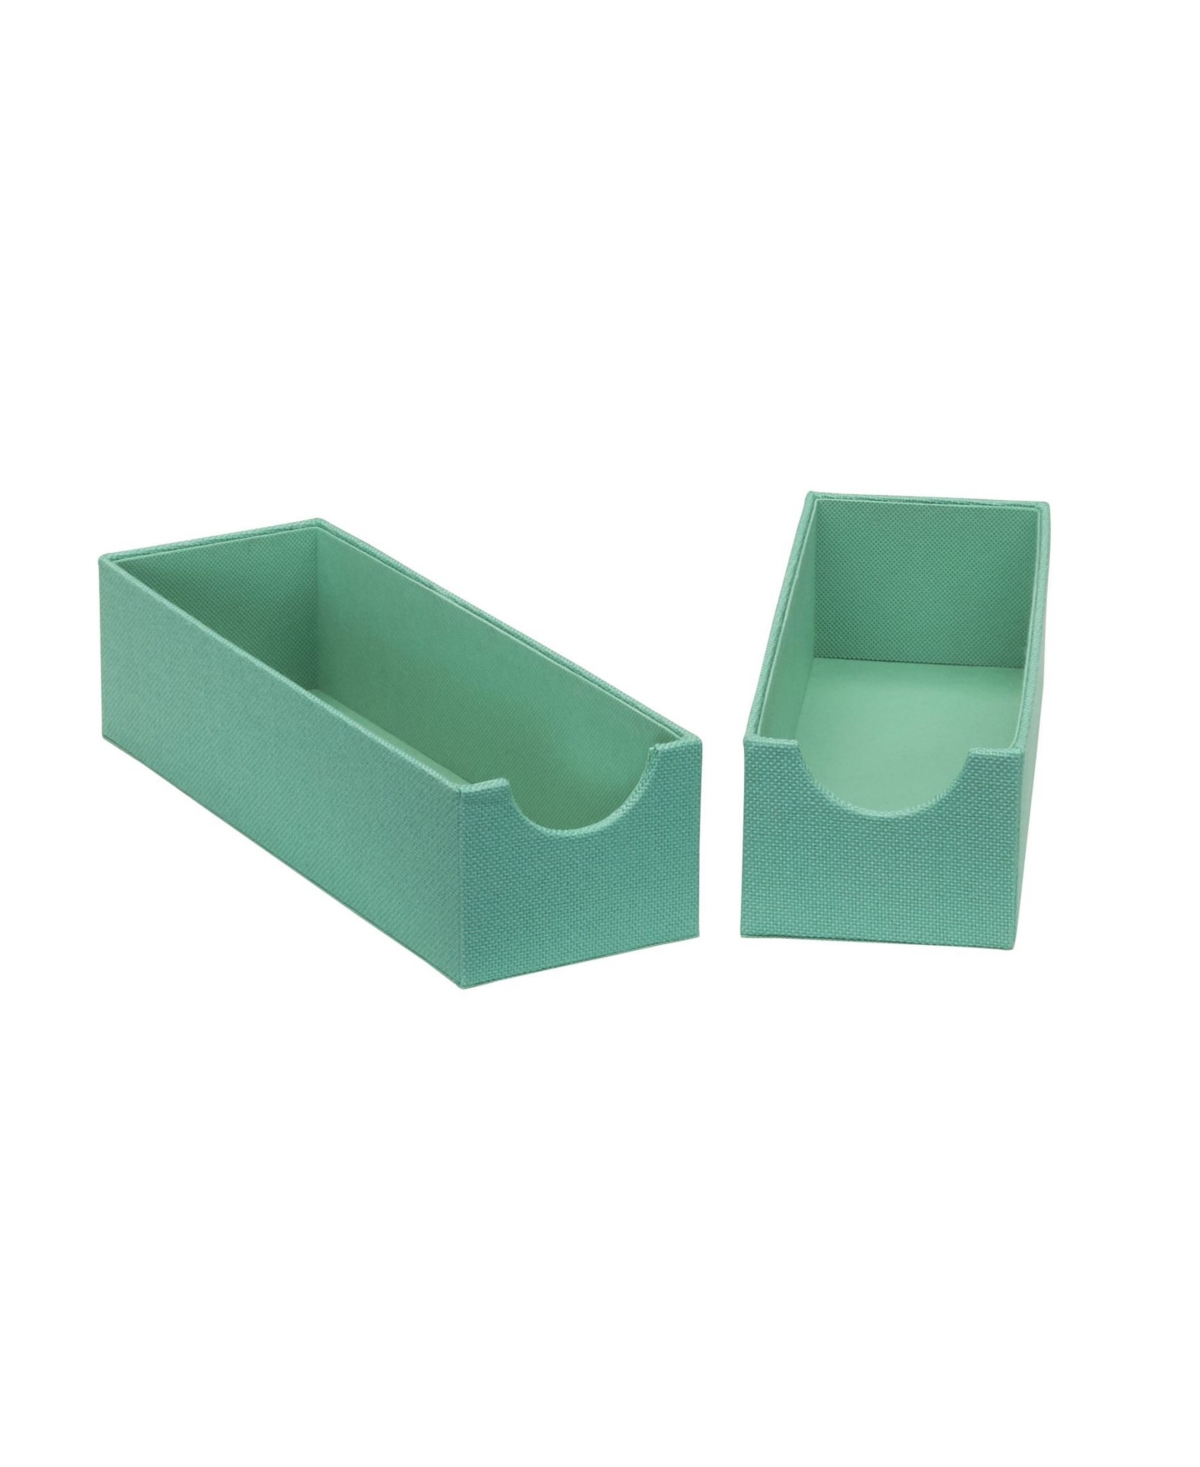 Household Essentials Drawer Organizers, Set Of 2 In Green